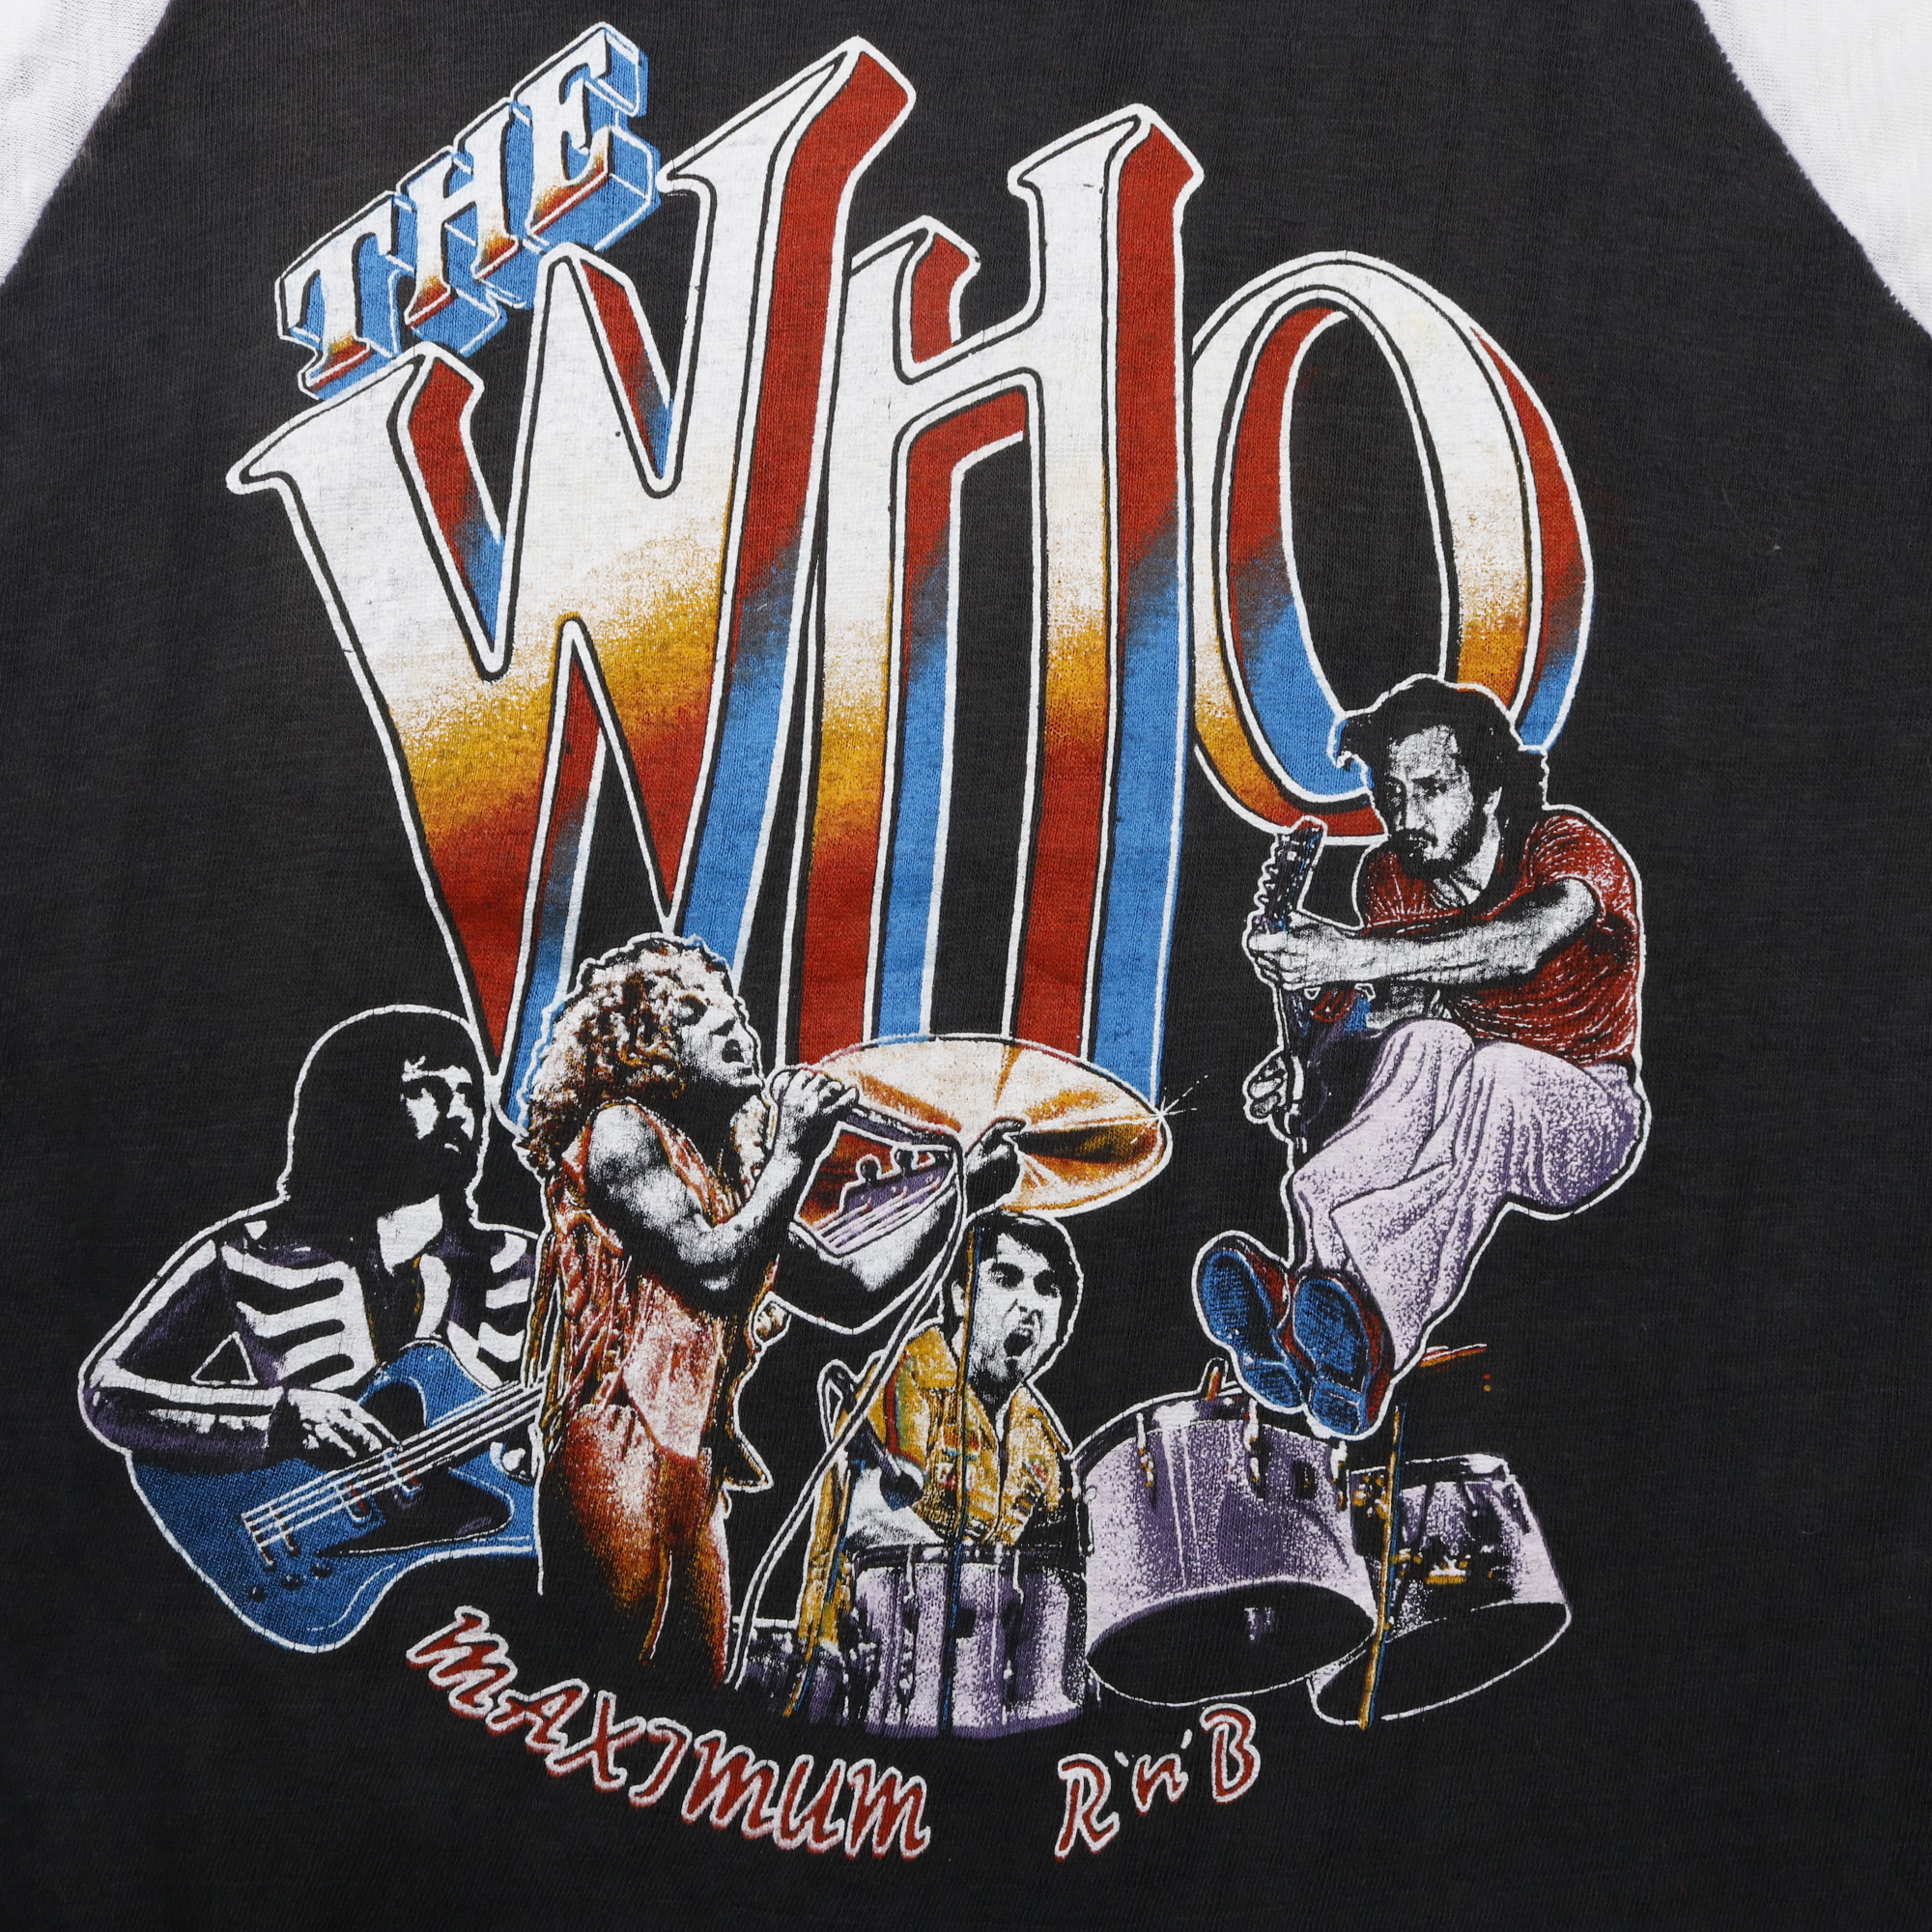 80's THE WHO VINTAGE BAND Tシャツ